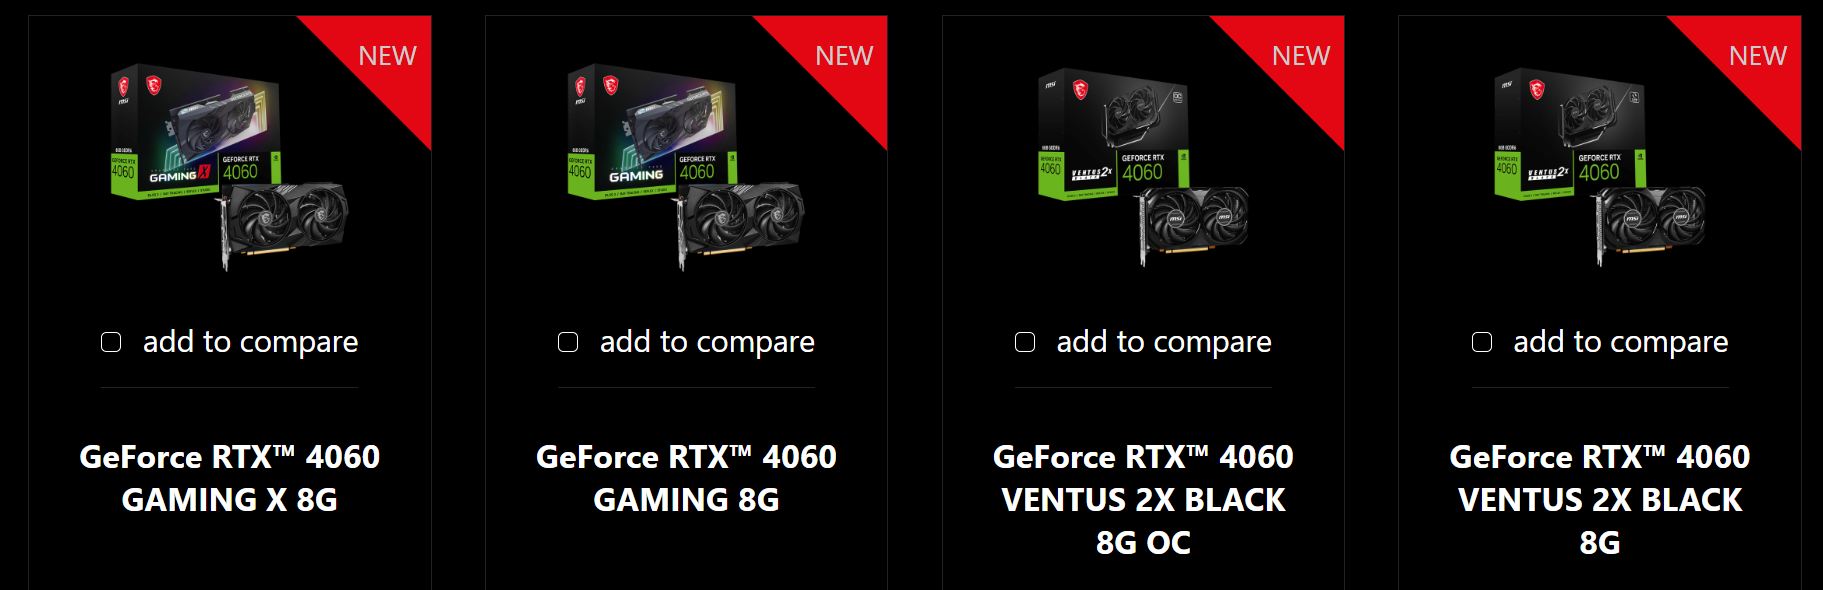 NVIDIA GeForce RTX 4050 is reportedly coming in June with only 6GB of VRAM